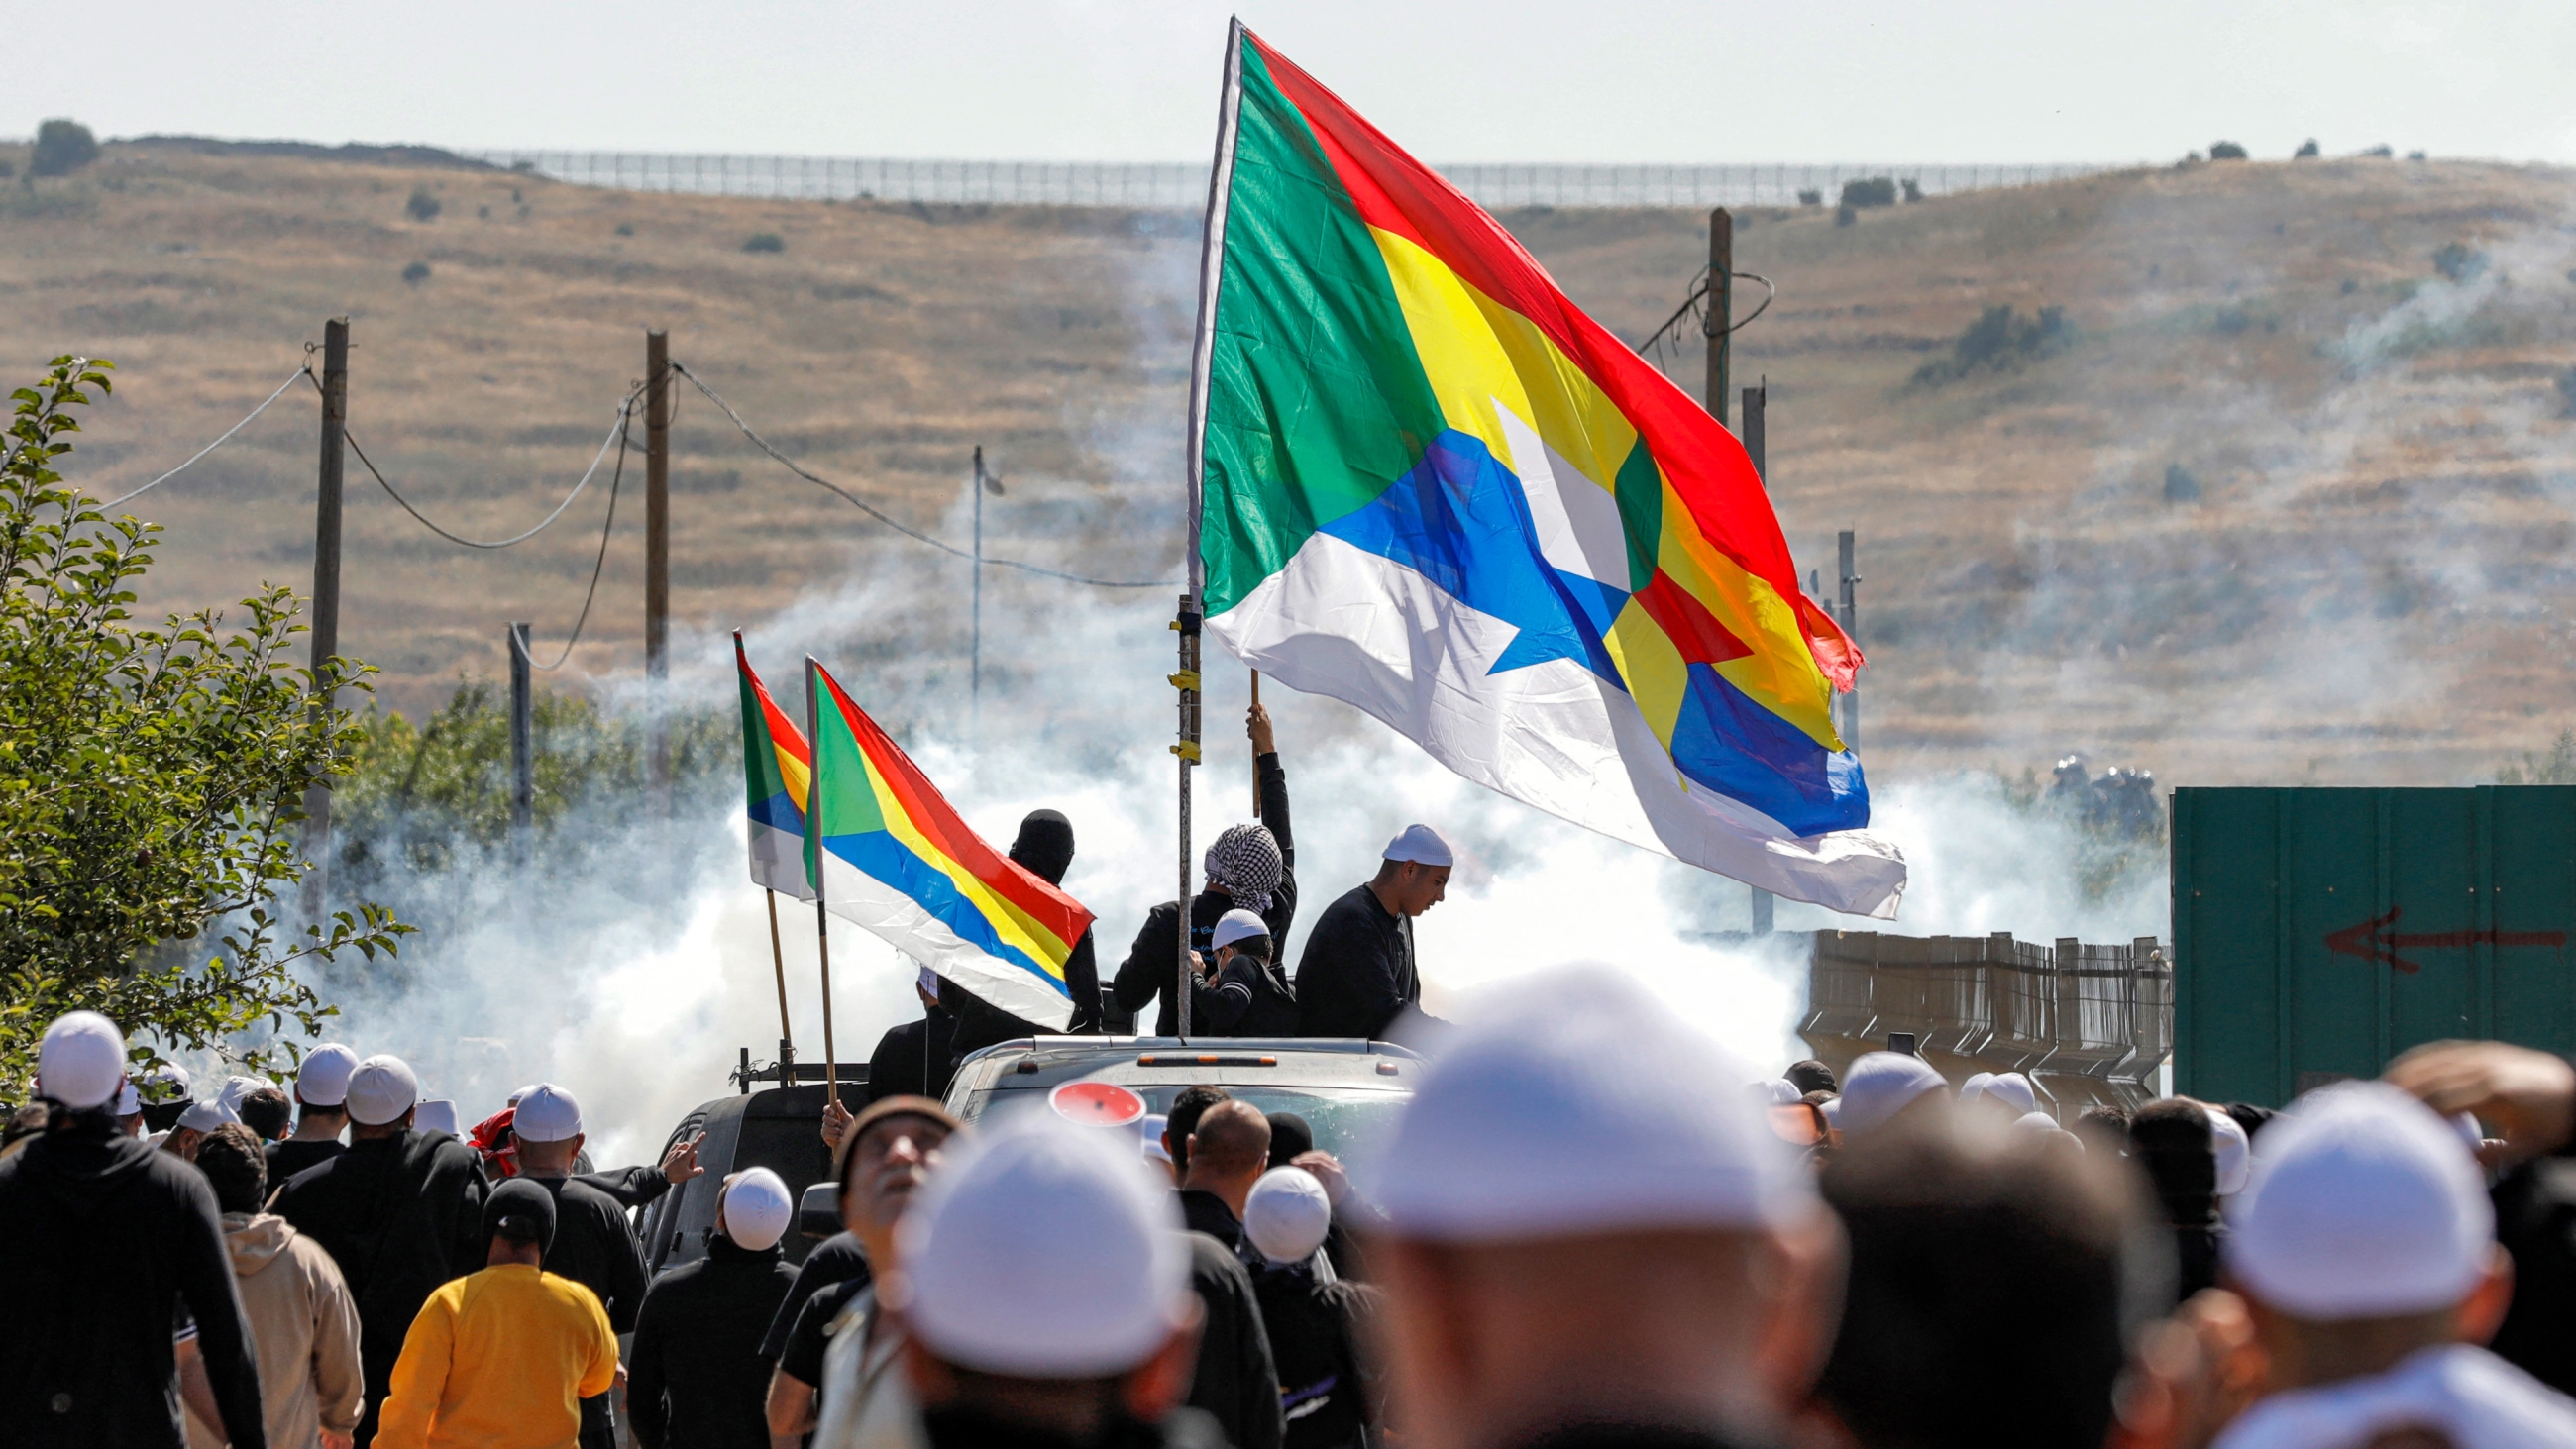 Members of the Druze community protest the Israeli wind turbine project reportedly planned in agricultural lands in their village of Majdal Shams in the Israel-occupied Golan Heights on 21 June 2023 (AFP)